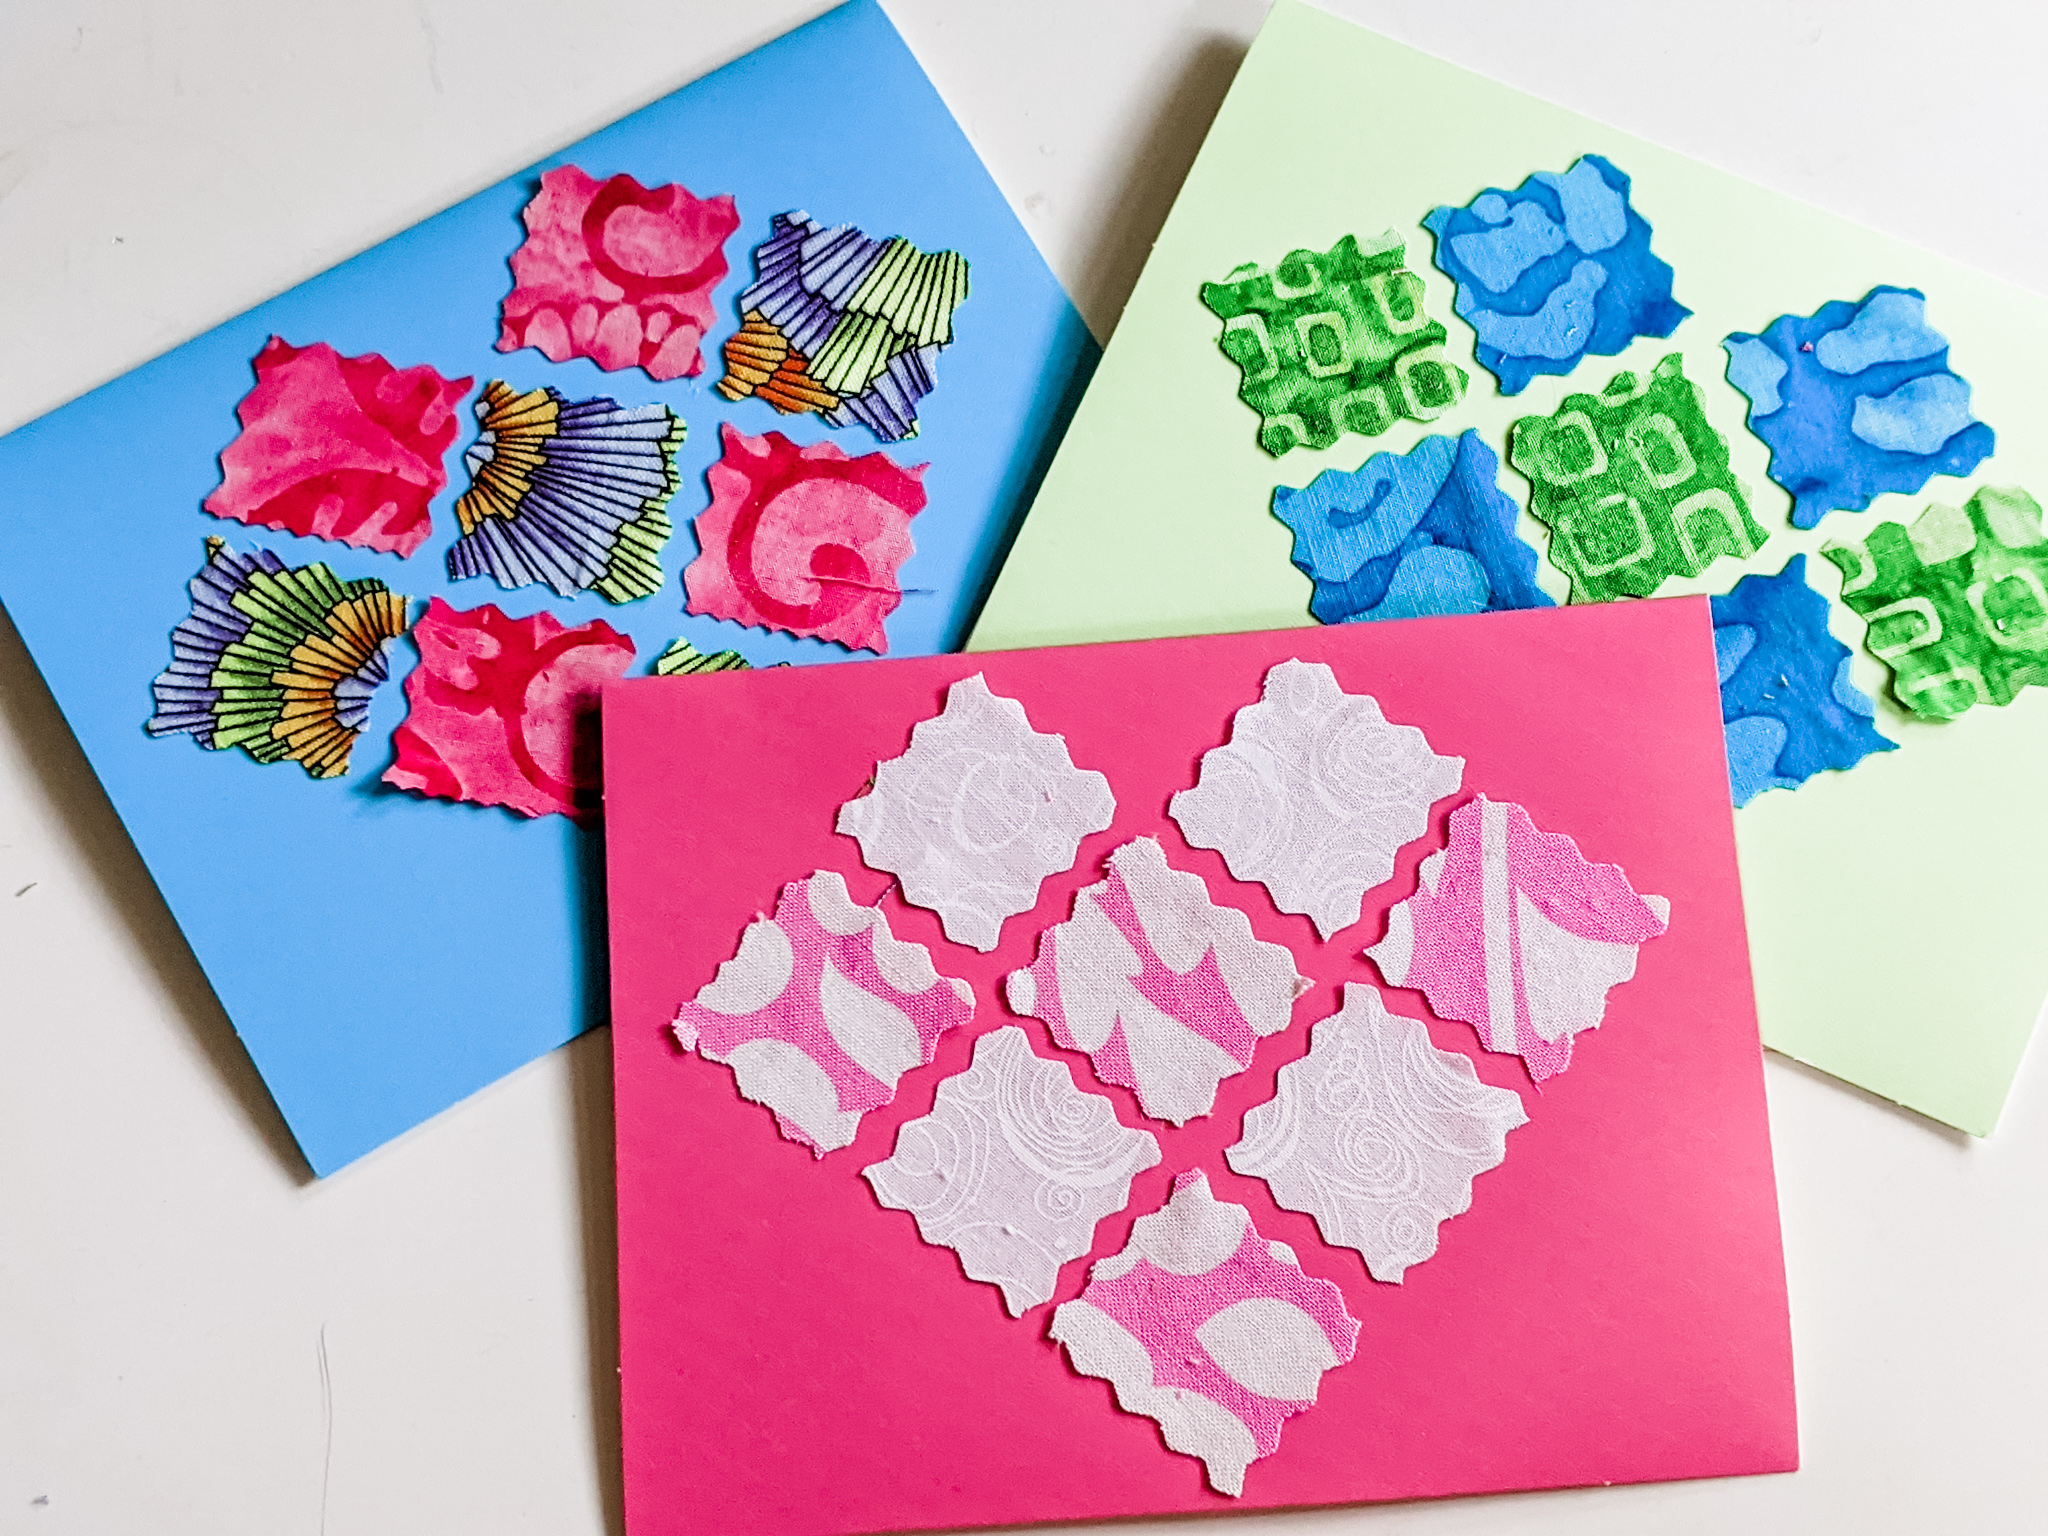 Some of the finished Fabric DIY Valentines - a blue, pink, and white one.